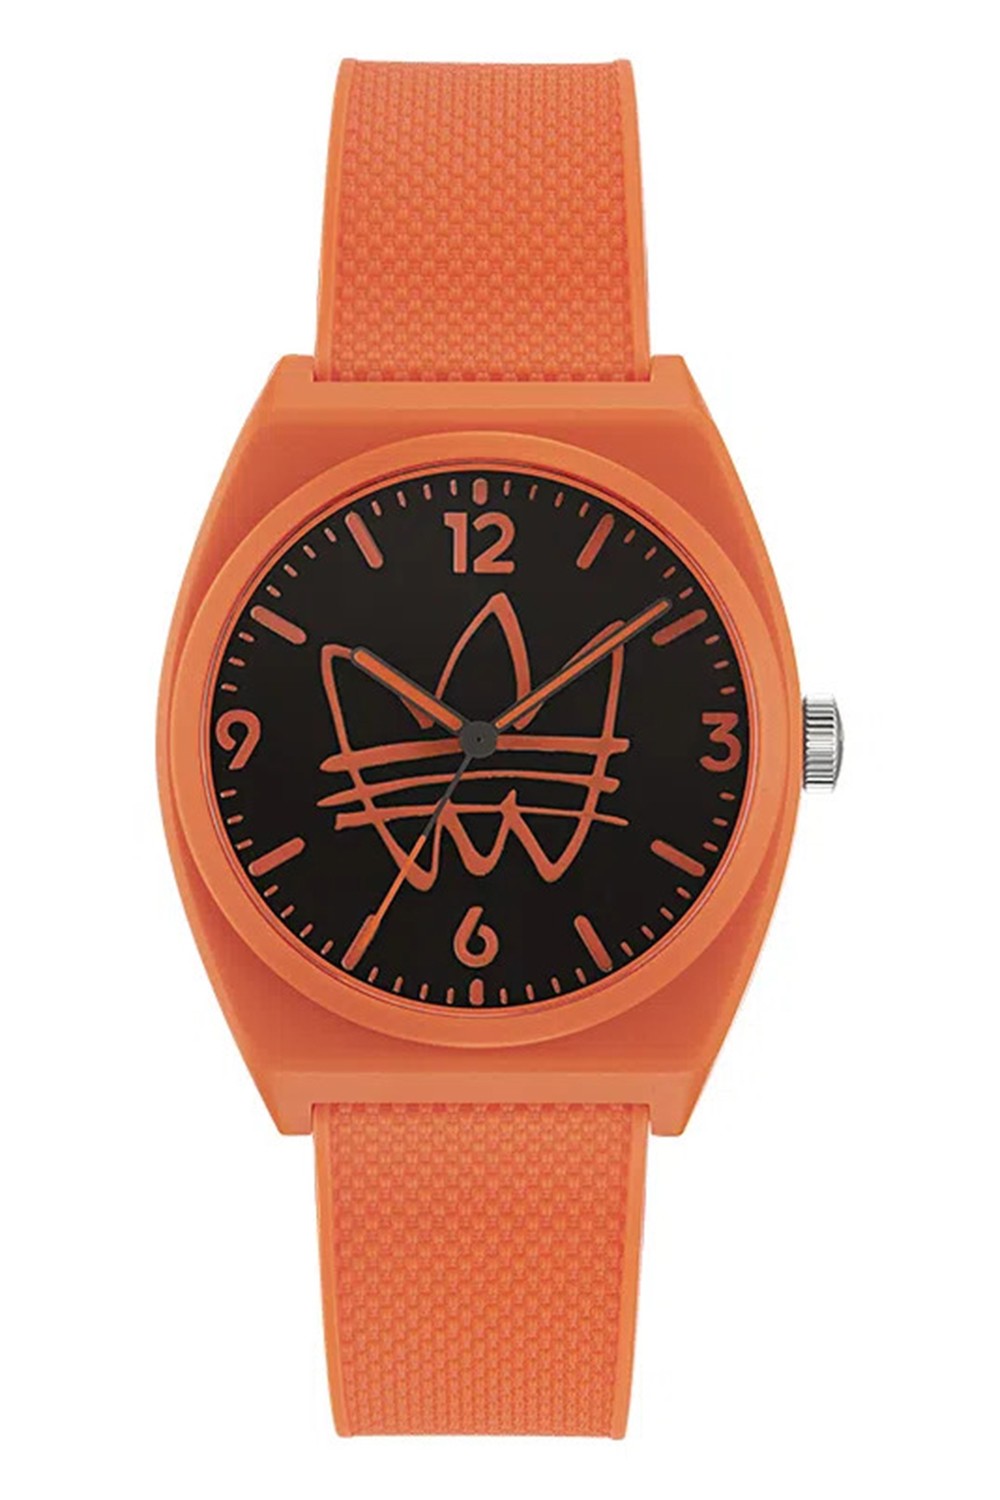 Adidas Originals Women\'s Watch Adidas Project AOST22562 unisex Rubber Watch online Adidas AOST22562 Watch Two Comprar Barato Project Rubber AOST22562 Orange Clicktime.eu» Watch Comprar | Two unisex | Orange